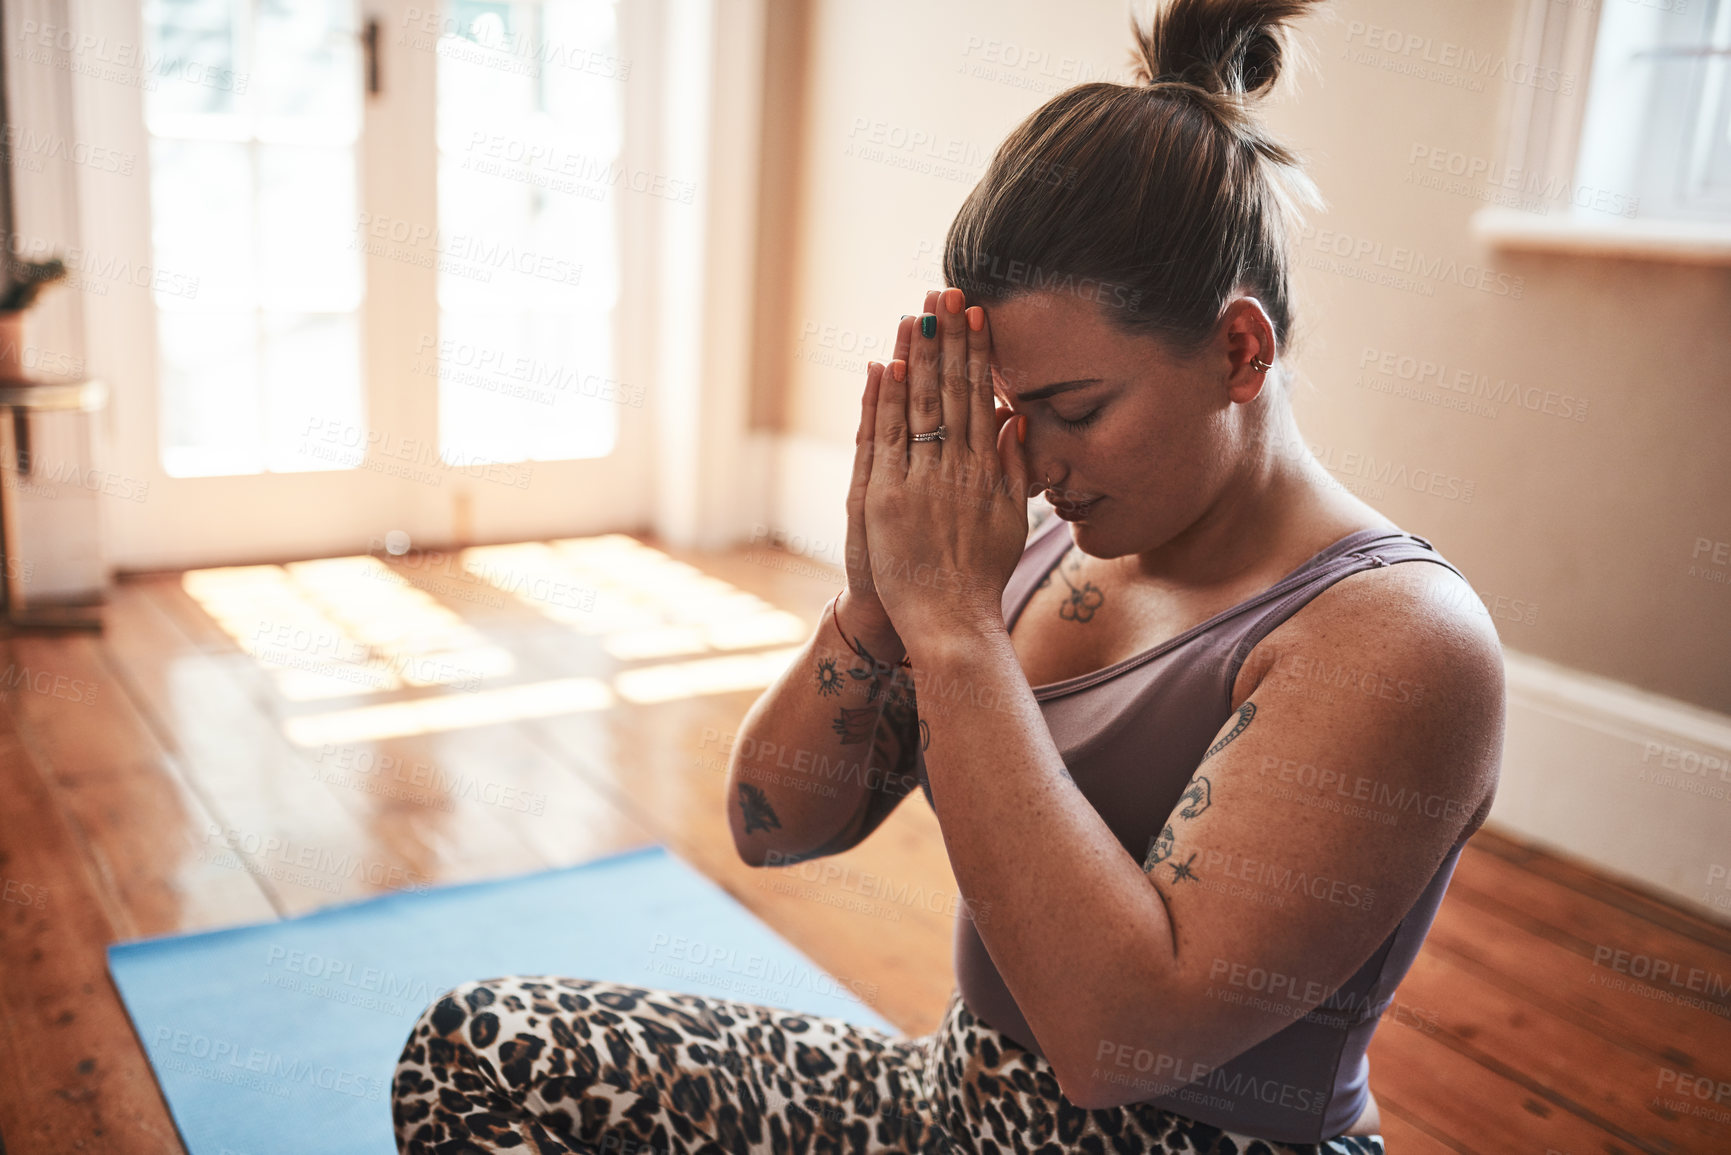 Buy stock photo Shot of a young woman meditating on a yoga mat at home